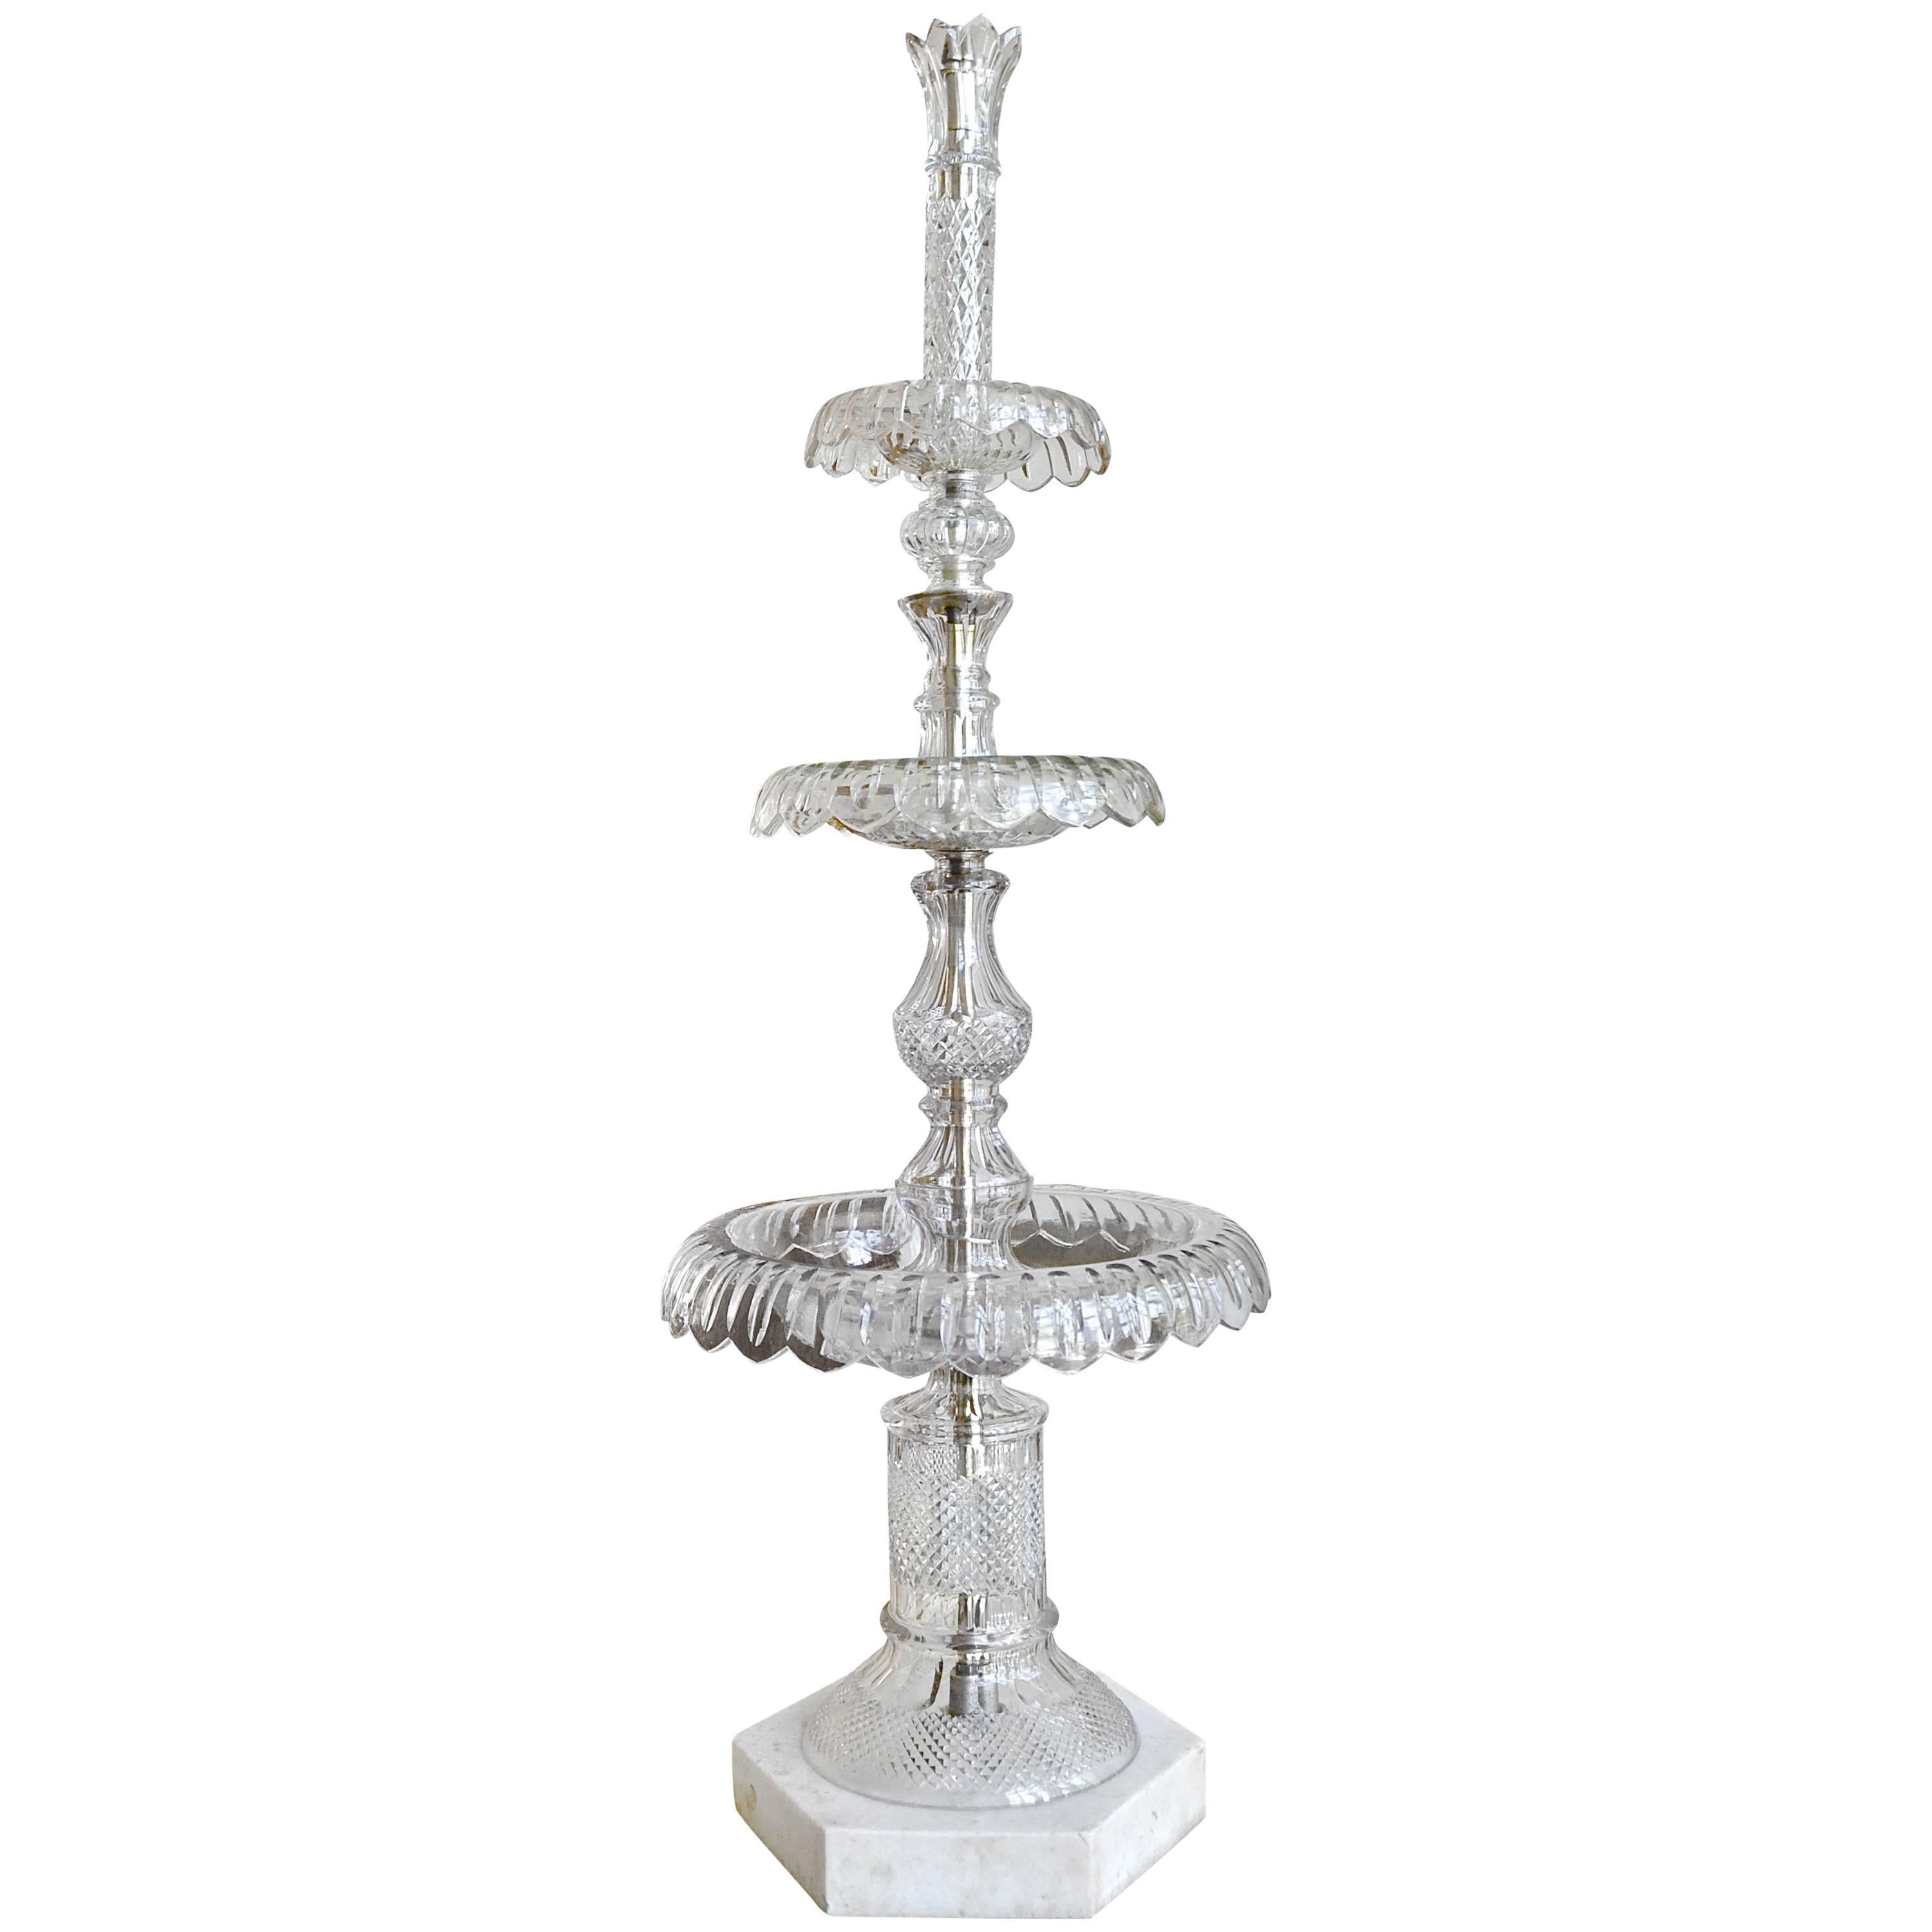 Monumental 19th Century Baccarat Style Crystal Table Fountain